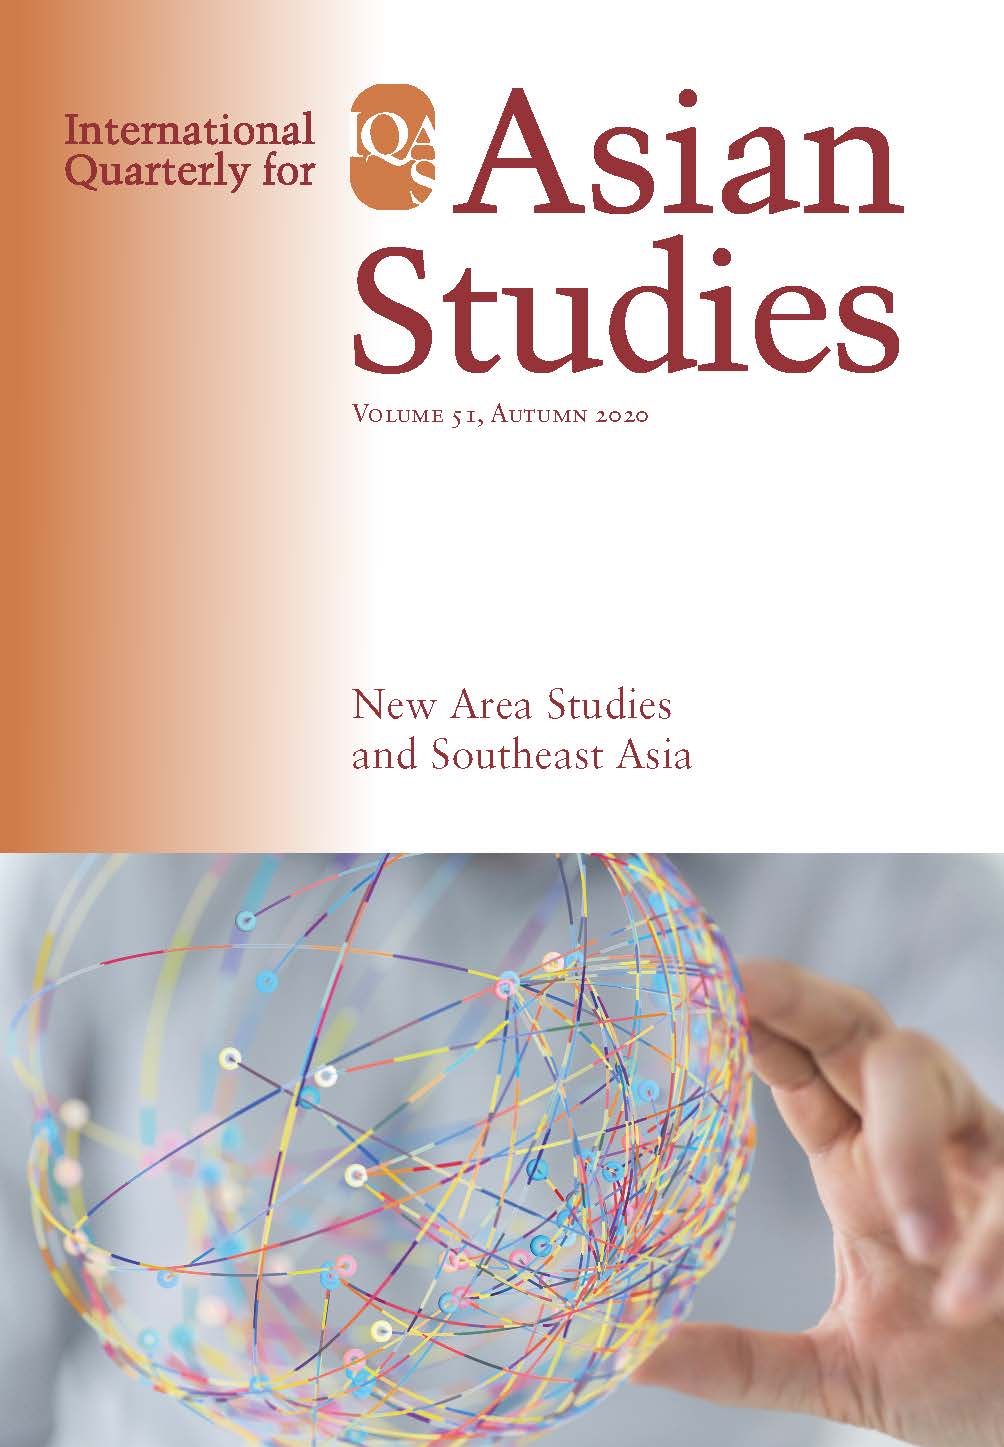 Journal Issue: New Area Studies and Southeast Asia